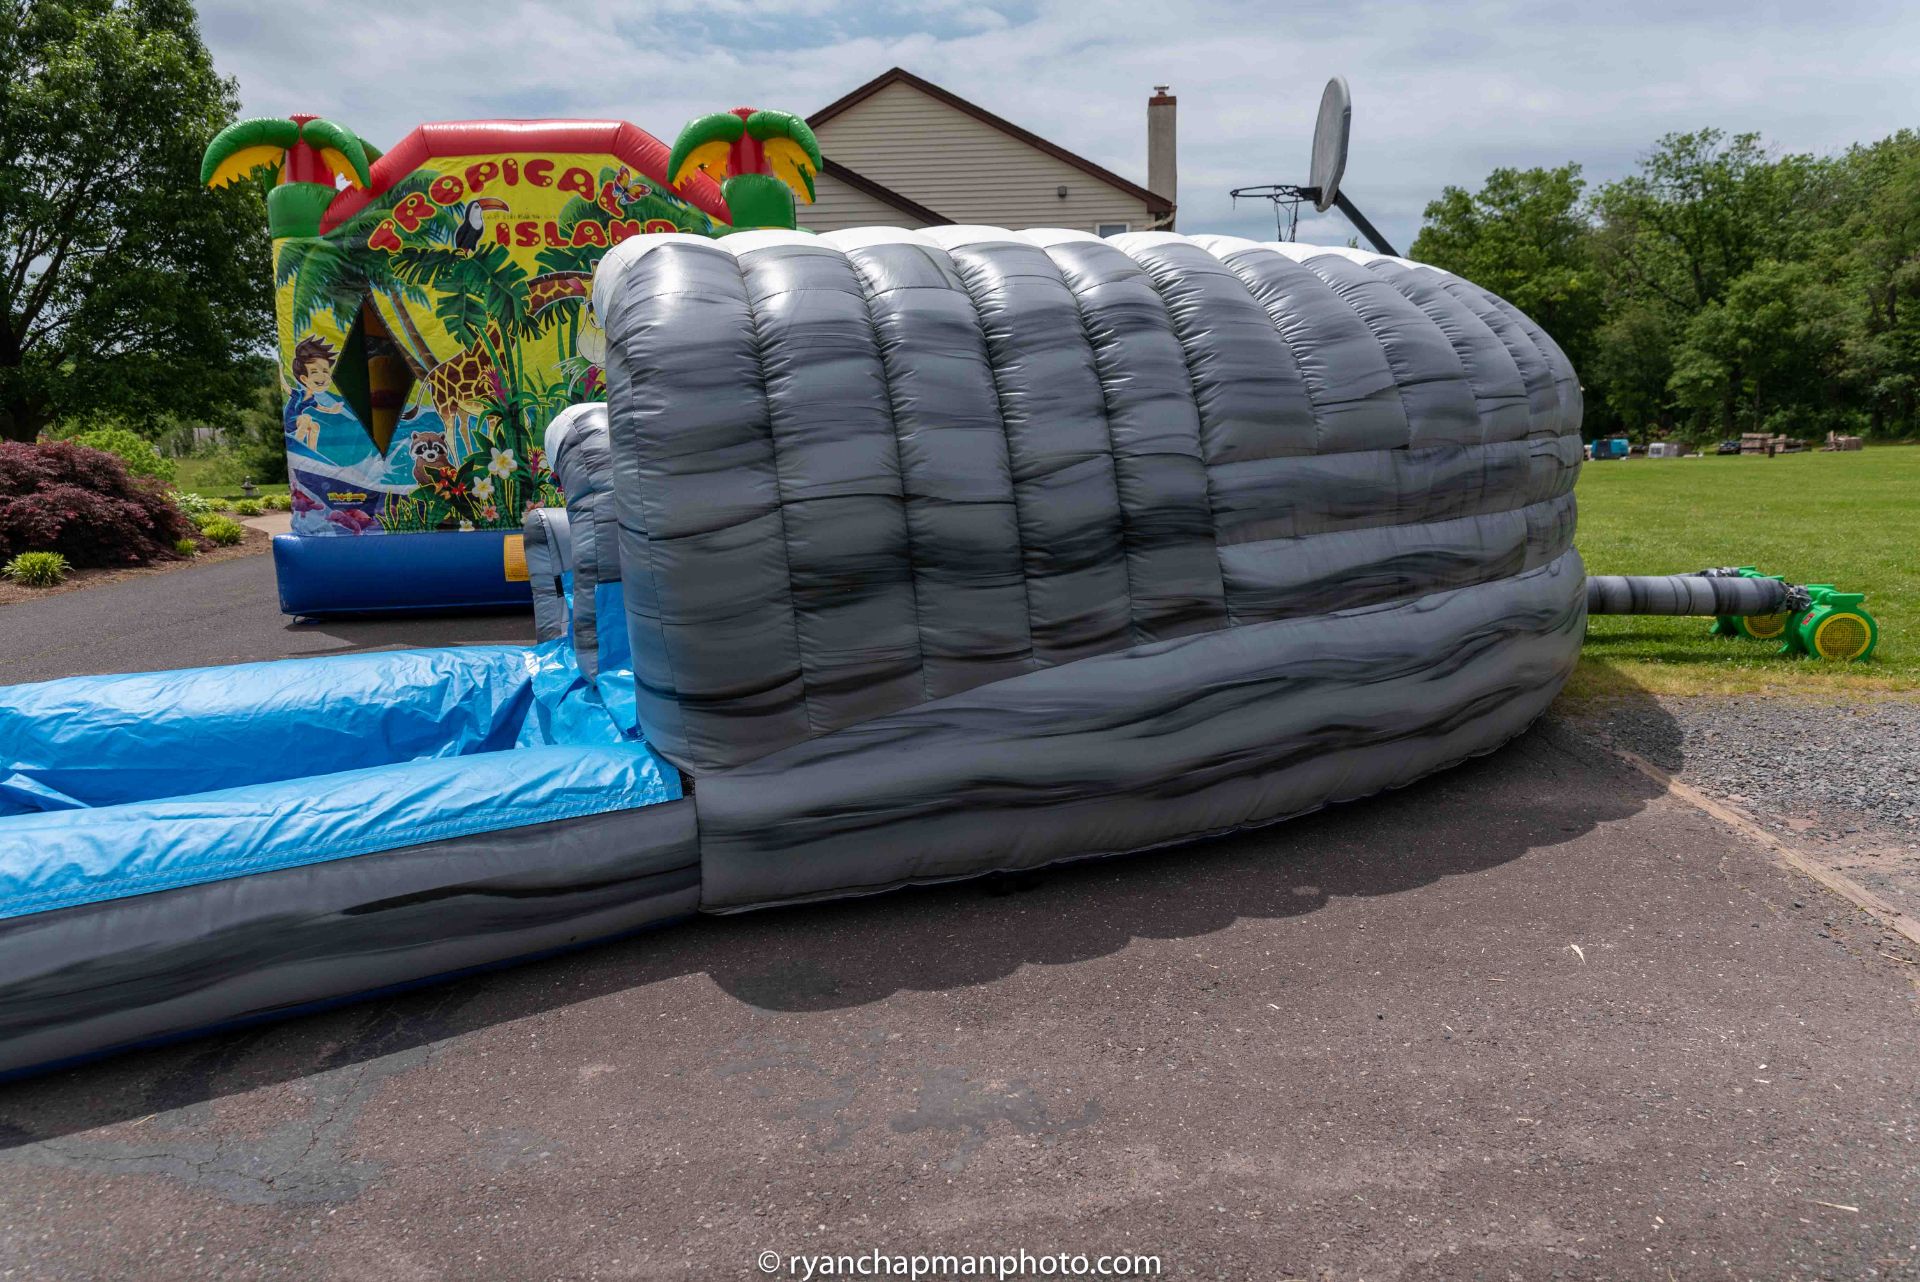 ROARING RIVERS CURVED SLIP-N-SLIDE INFLATABLE - (LOCATED AT TELFORD, PA) - Image 3 of 7